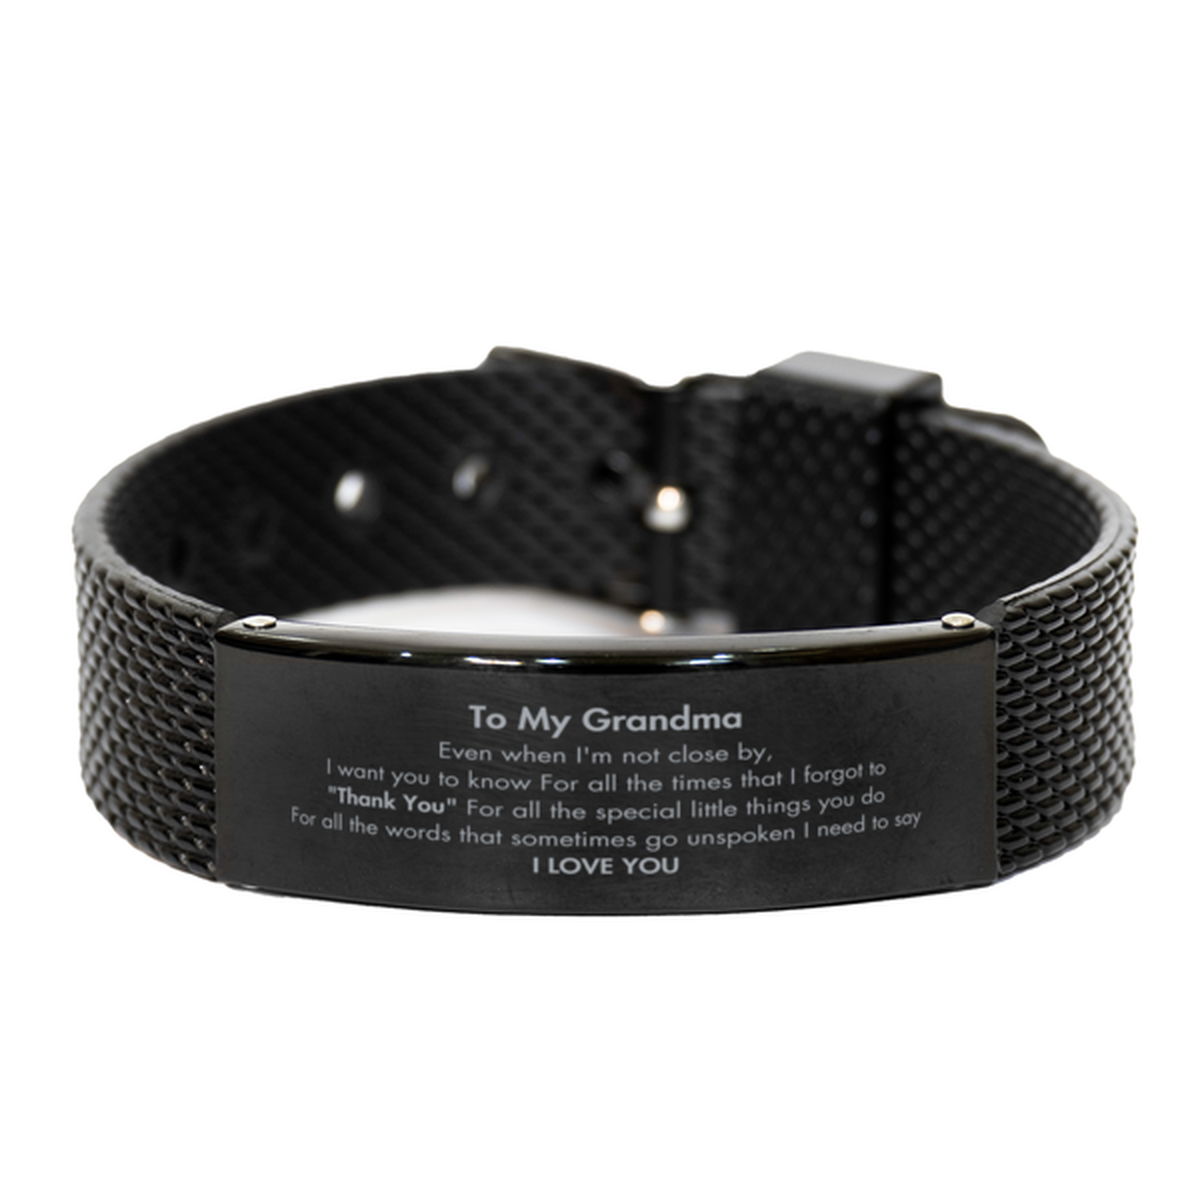 Thank You Gifts for Grandma, Keepsake Black Shark Mesh Bracelet Gifts for Grandma Birthday Mother's day Father's Day Grandma For all the words That sometimes go unspoken I need to say I LOVE YOU